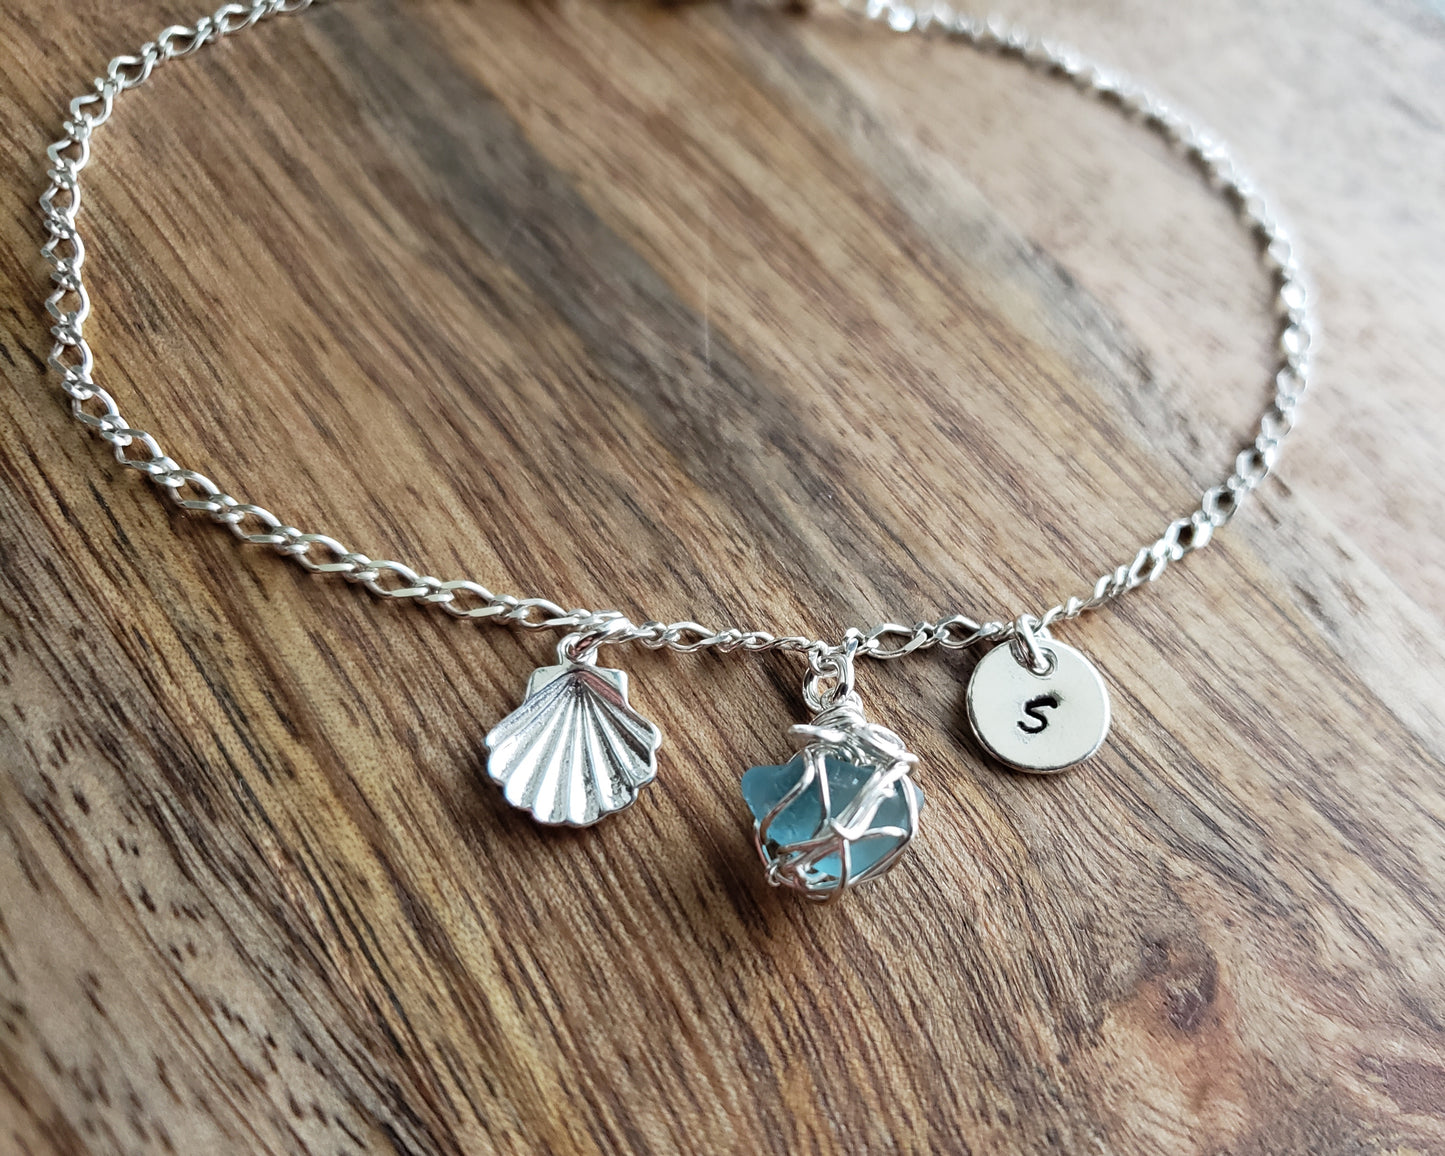 Deluxe Personalized Aqua Blue Beach Glass, Sea Shell, Infinity, Initial Ankle Bracelet-Anklet